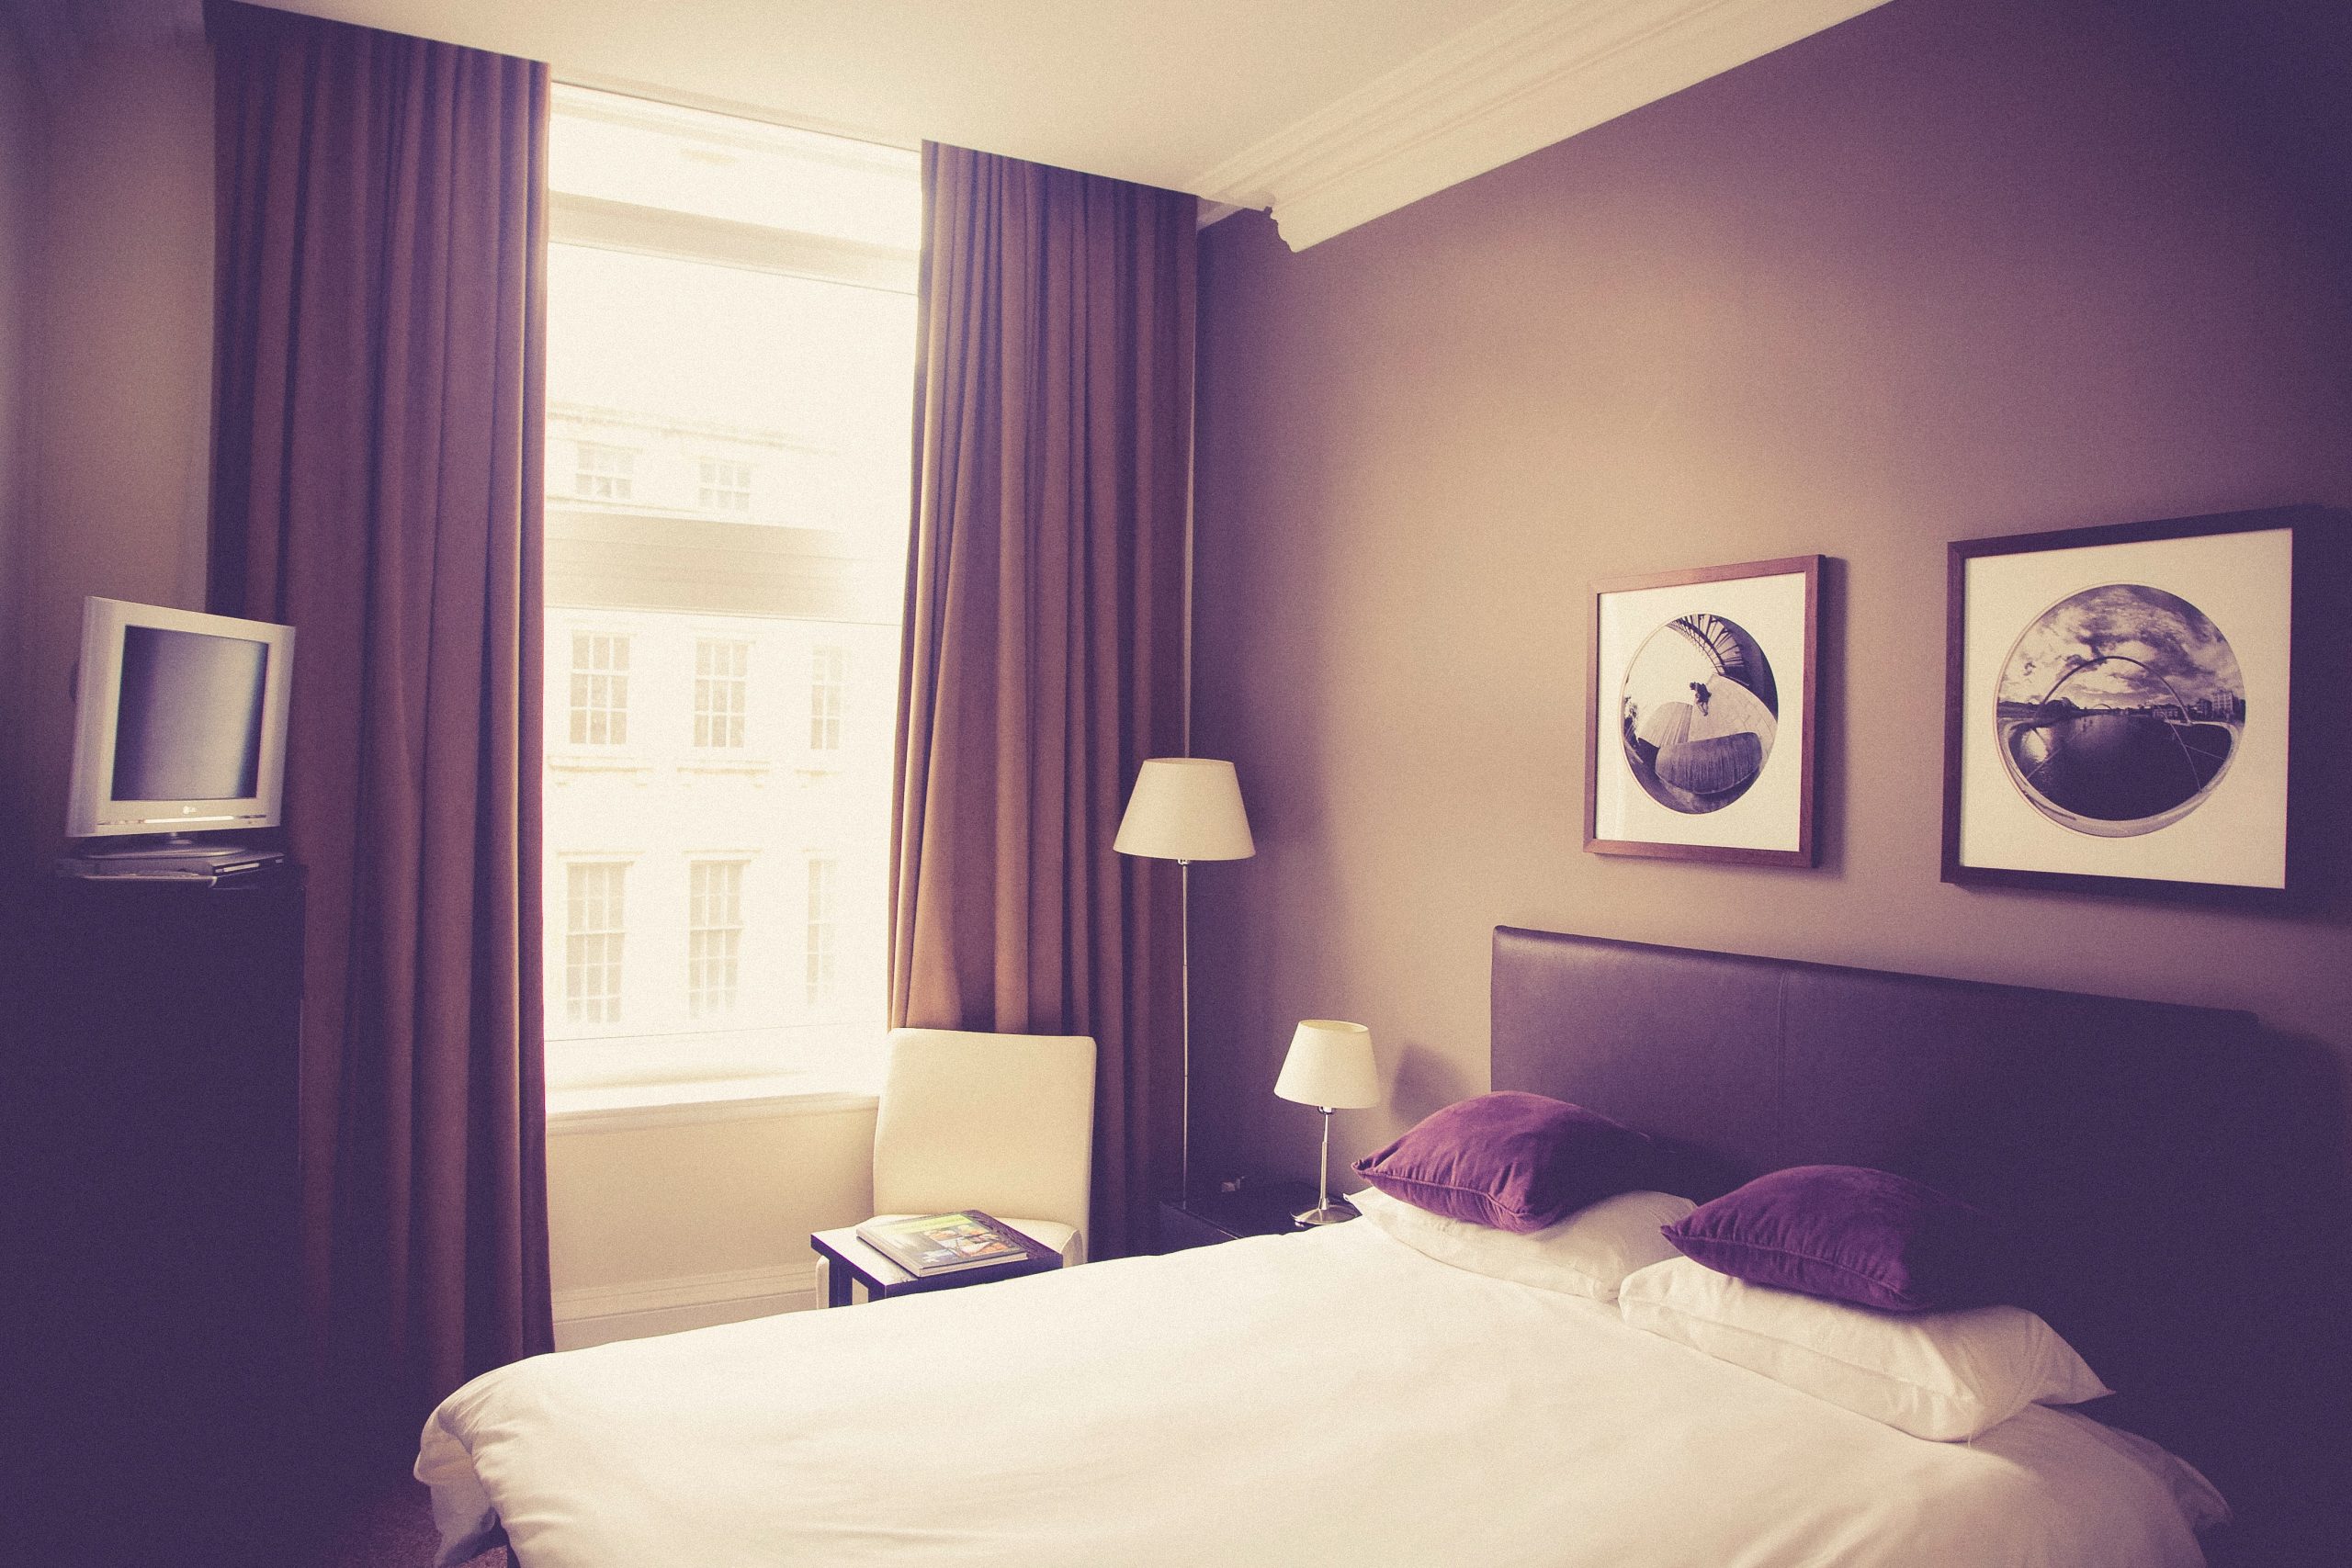 What to Look for in a Business Hotel